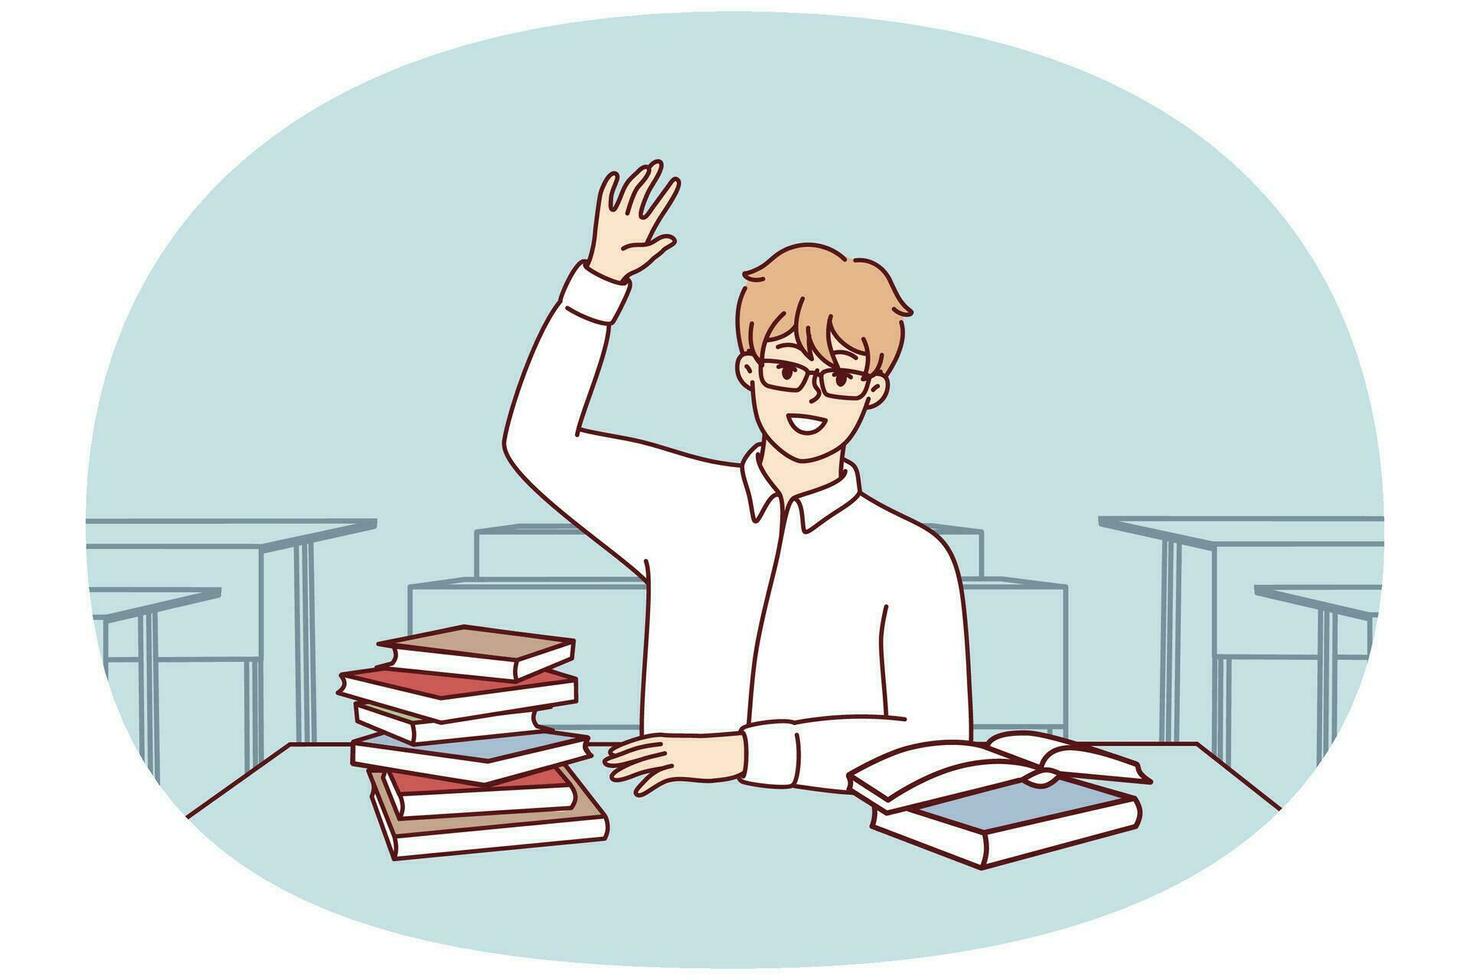 Boy high school student sits at desk with textbooks and workbooks and pulls hand up. Vector image